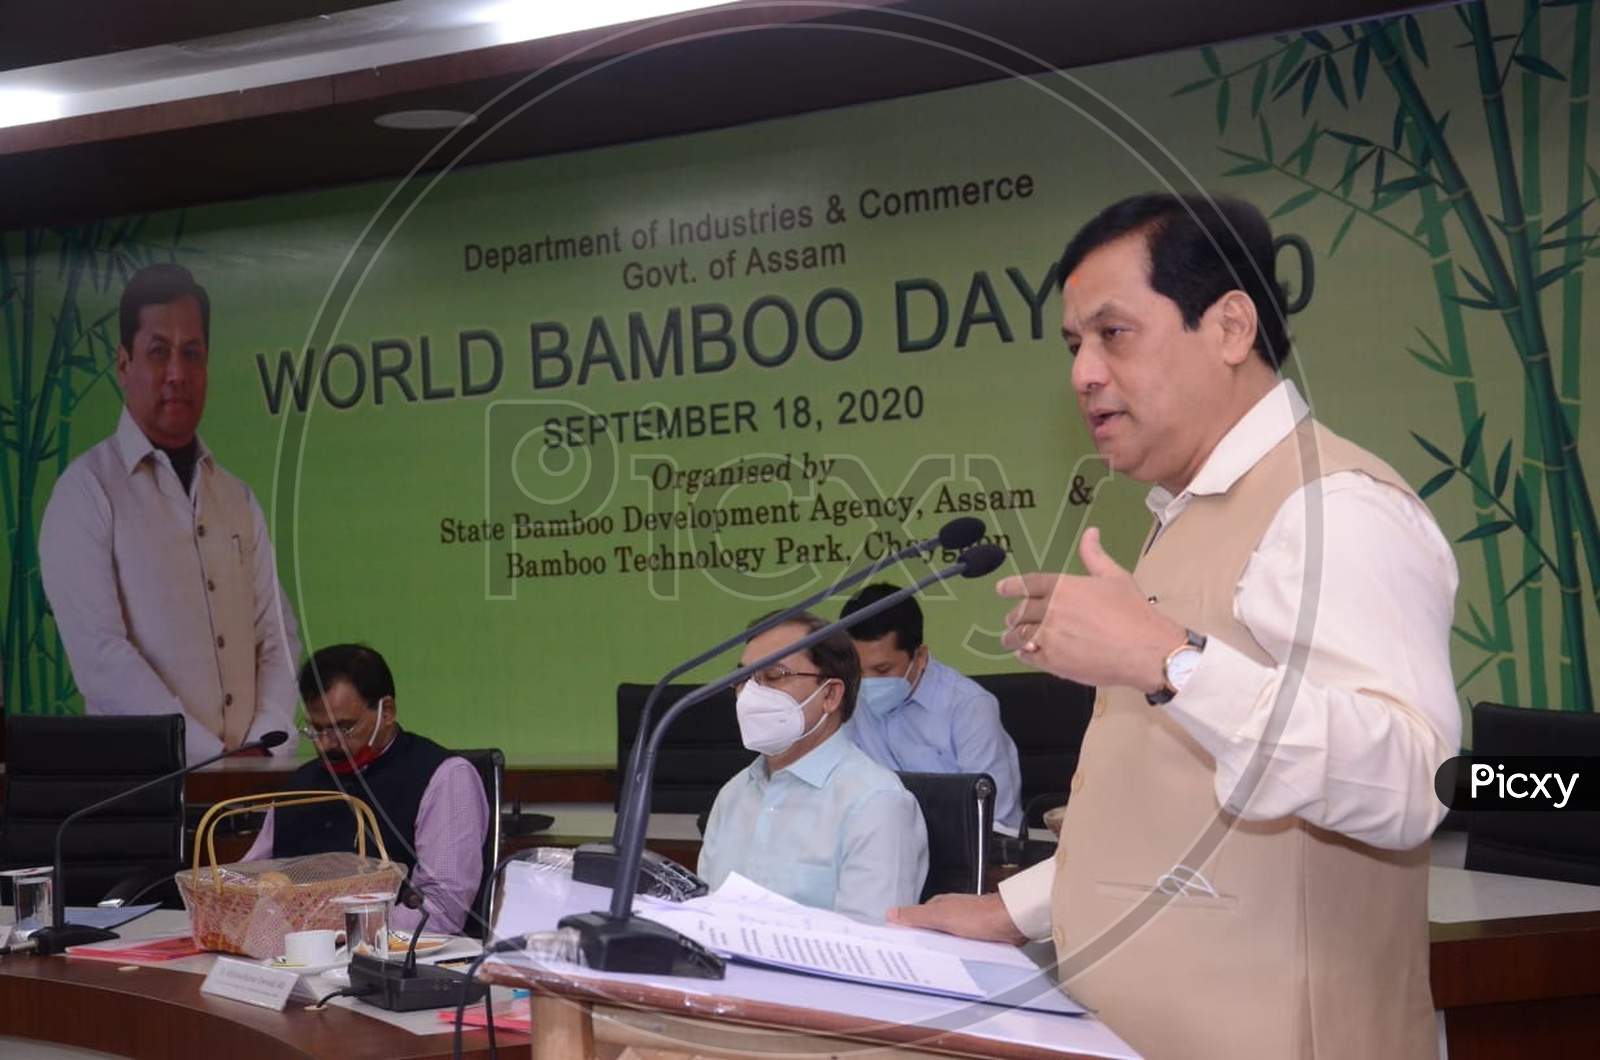 Assam Chief Minister Sarbananda Sonowal speaking at the World Bamboo Day celebration at Assam Administrative Staff College in Guwahati on September 18, 2020.